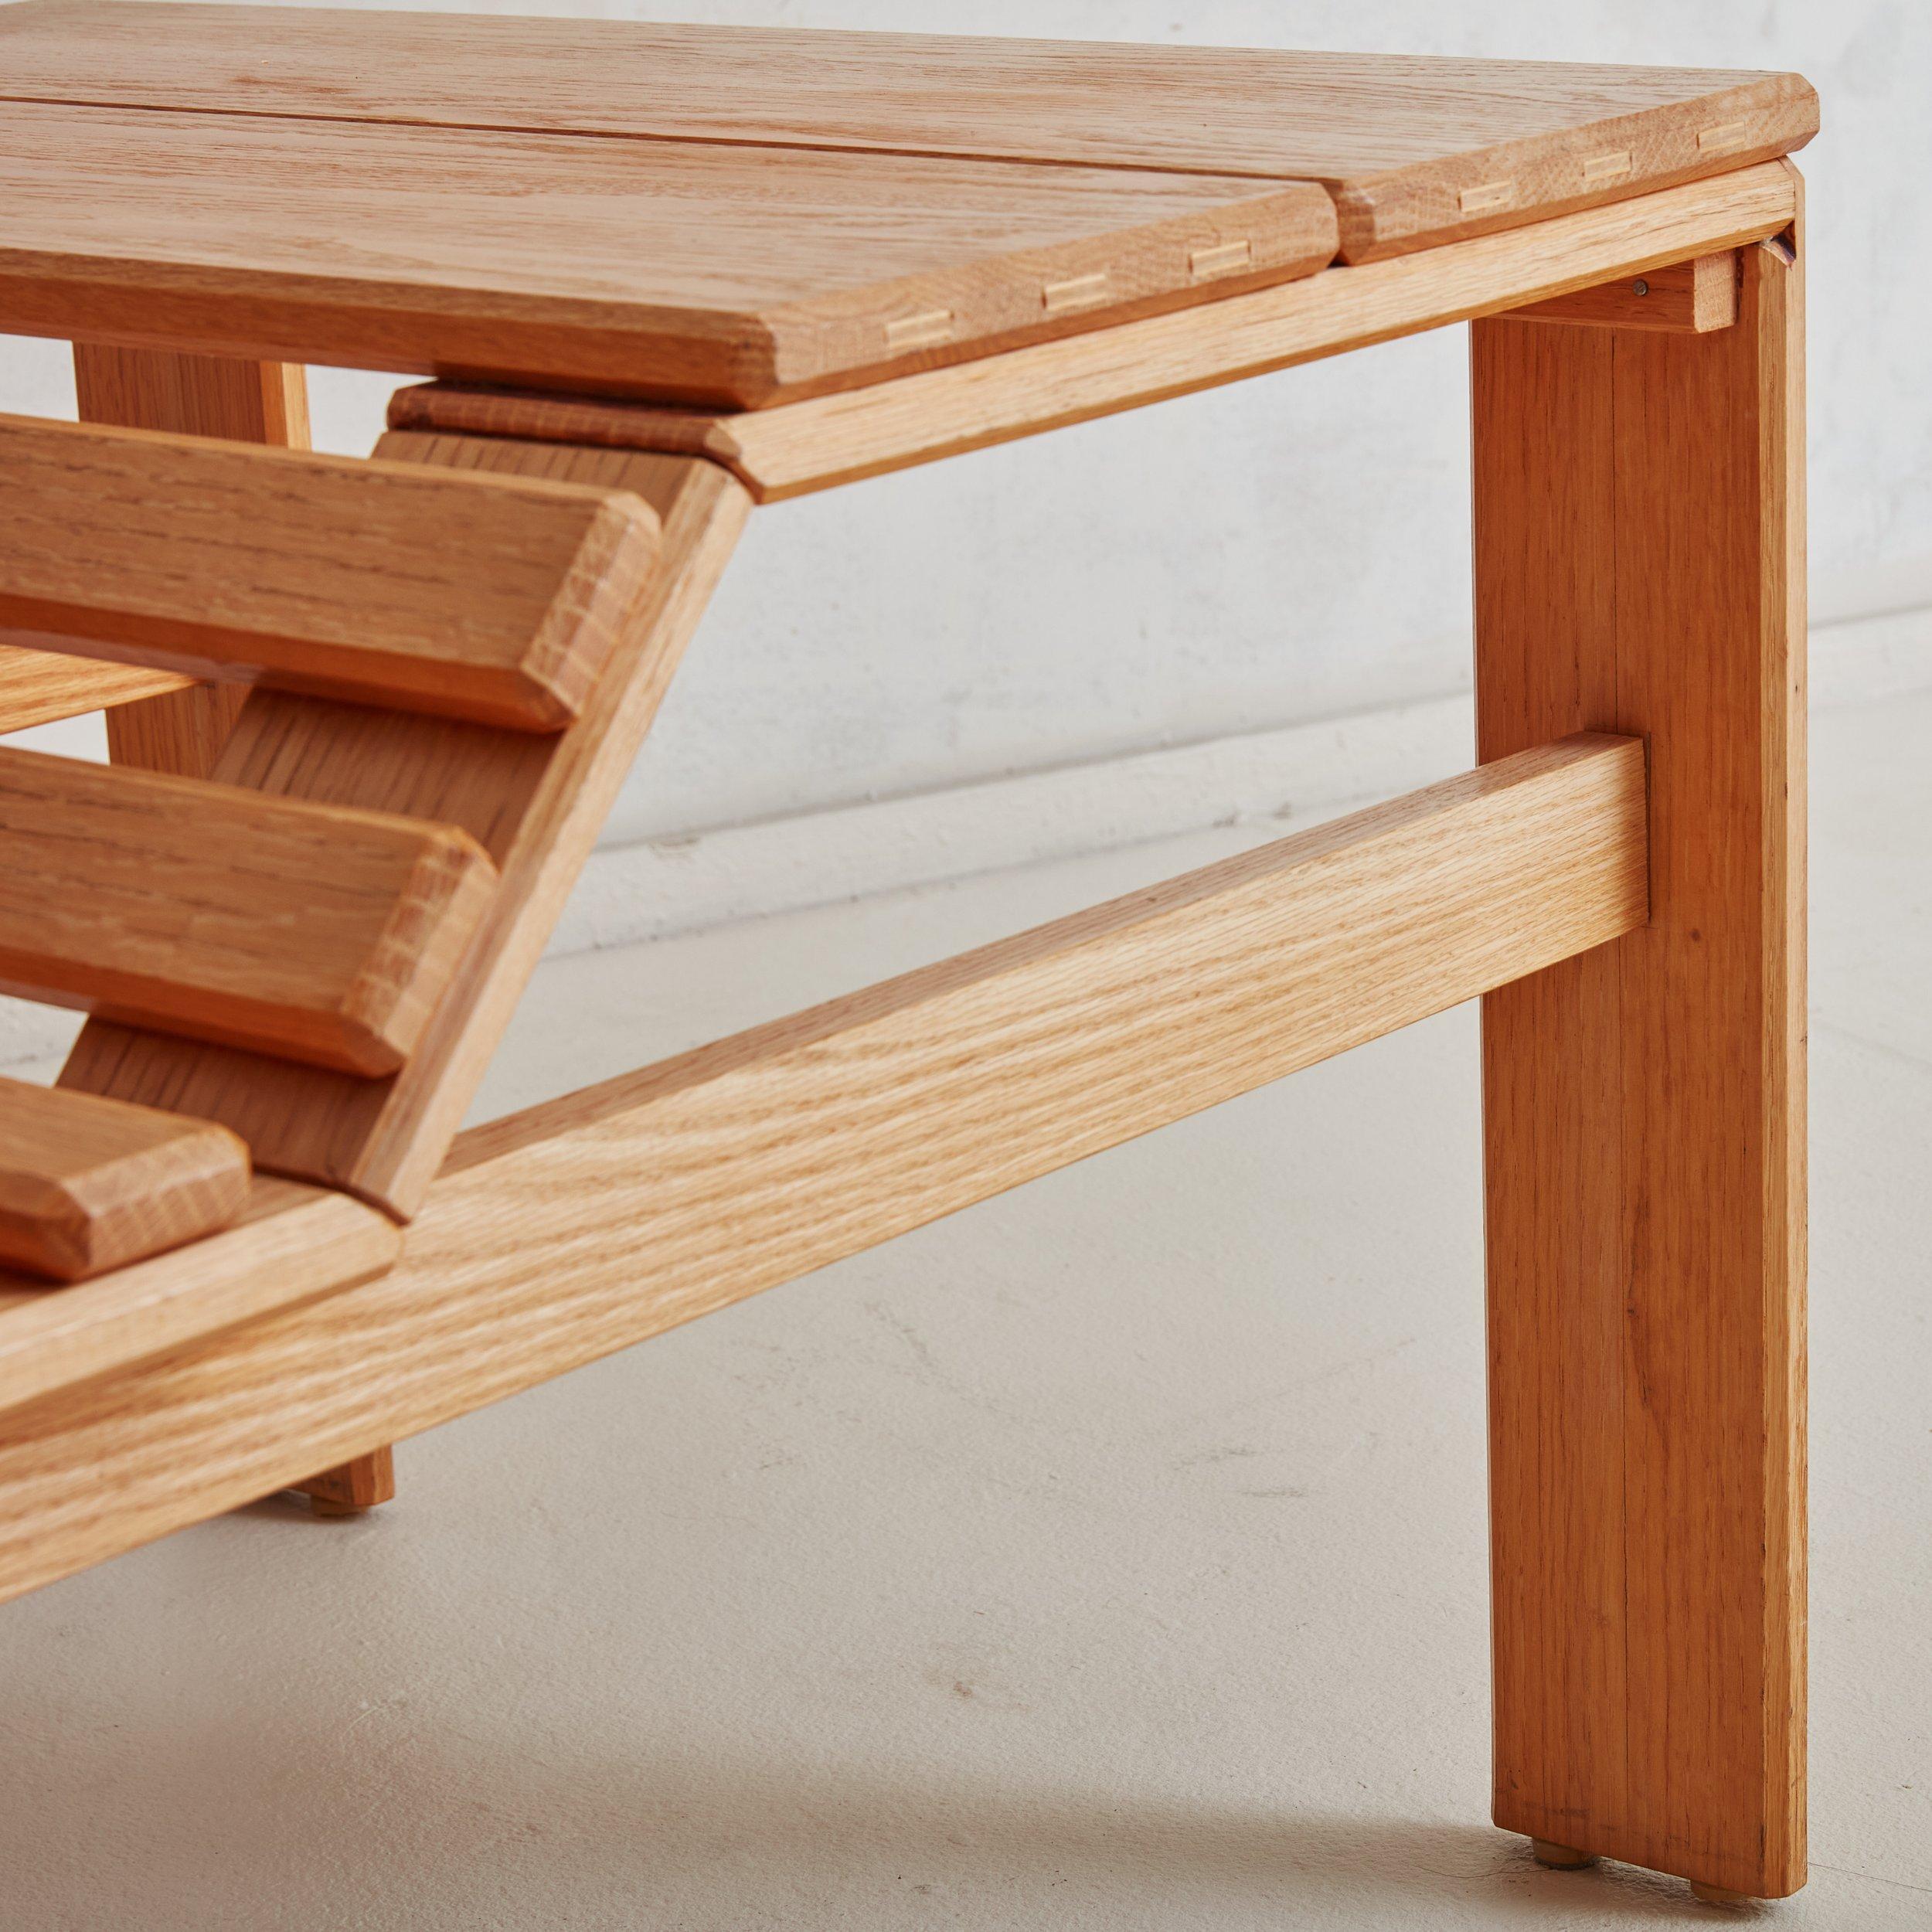 Danish Natural Wood Bench/Coffee Table, Mid 20th Century For Sale 5